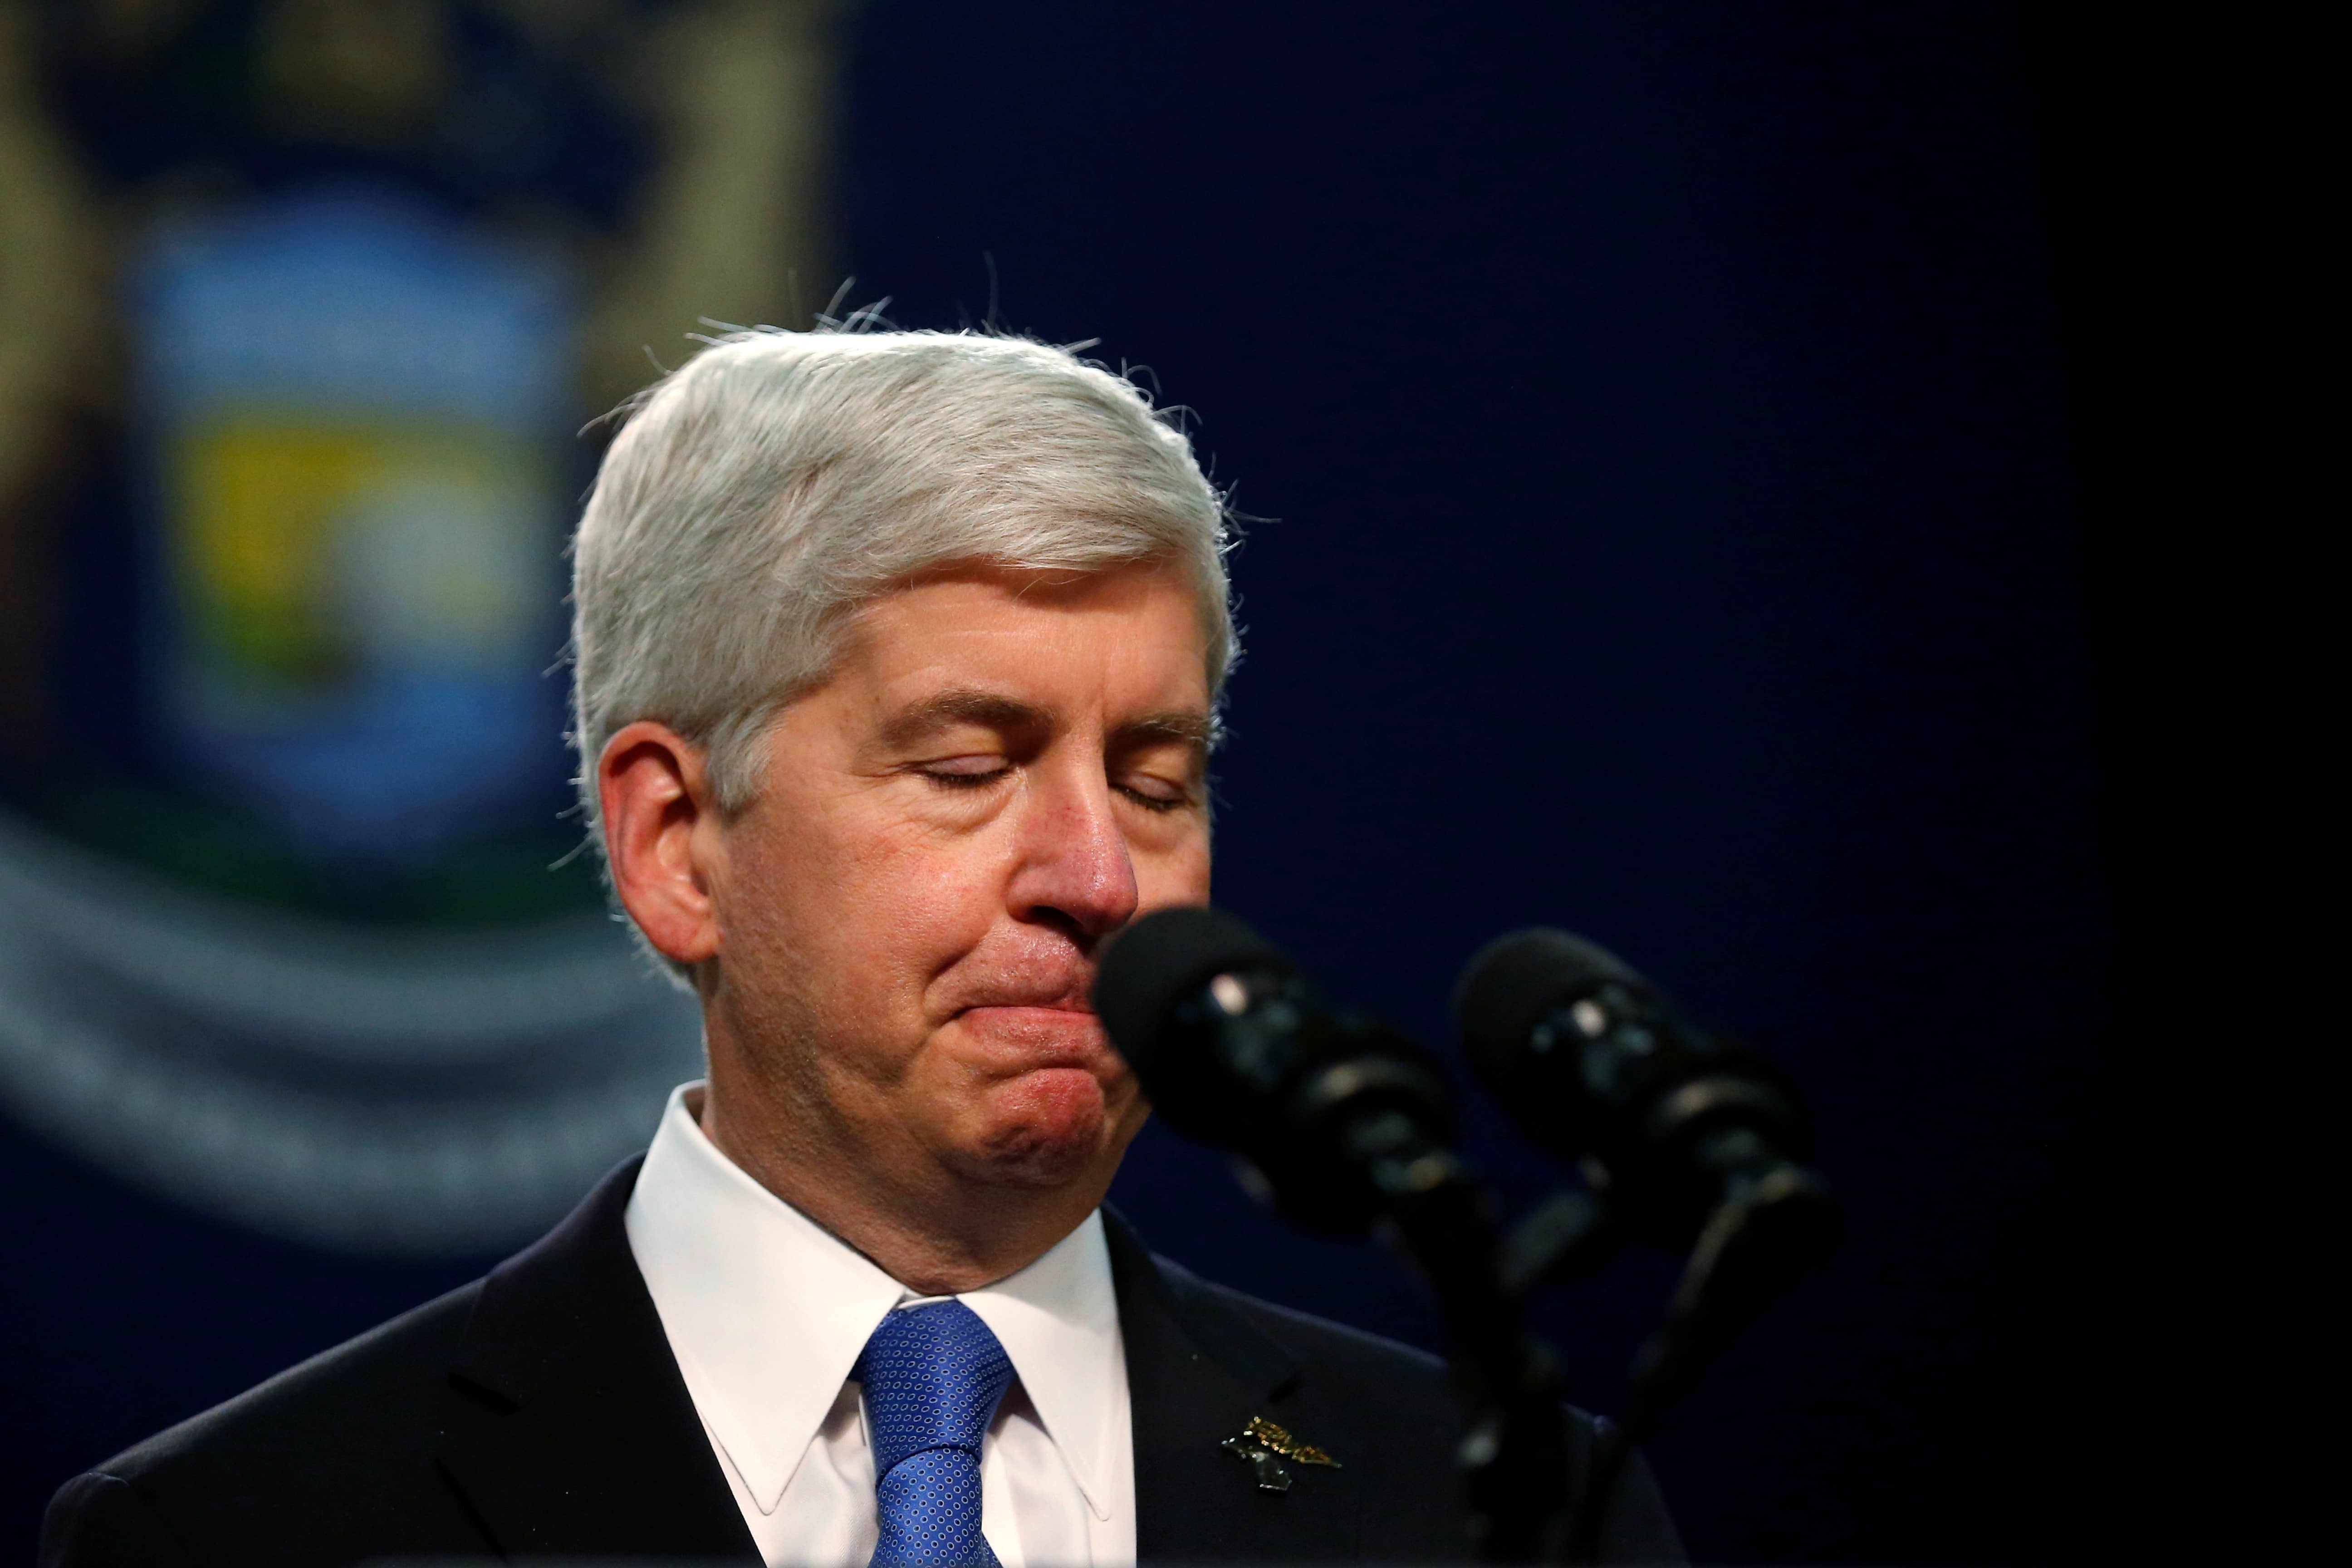 file-photo-michigan-governor-rick-snyder-pauses-as-he-speaks-at-north-western-high-school-in-flint-a-city-struggling-with-the-effects-of-lead-poisoned-drinking-water-in-michigan